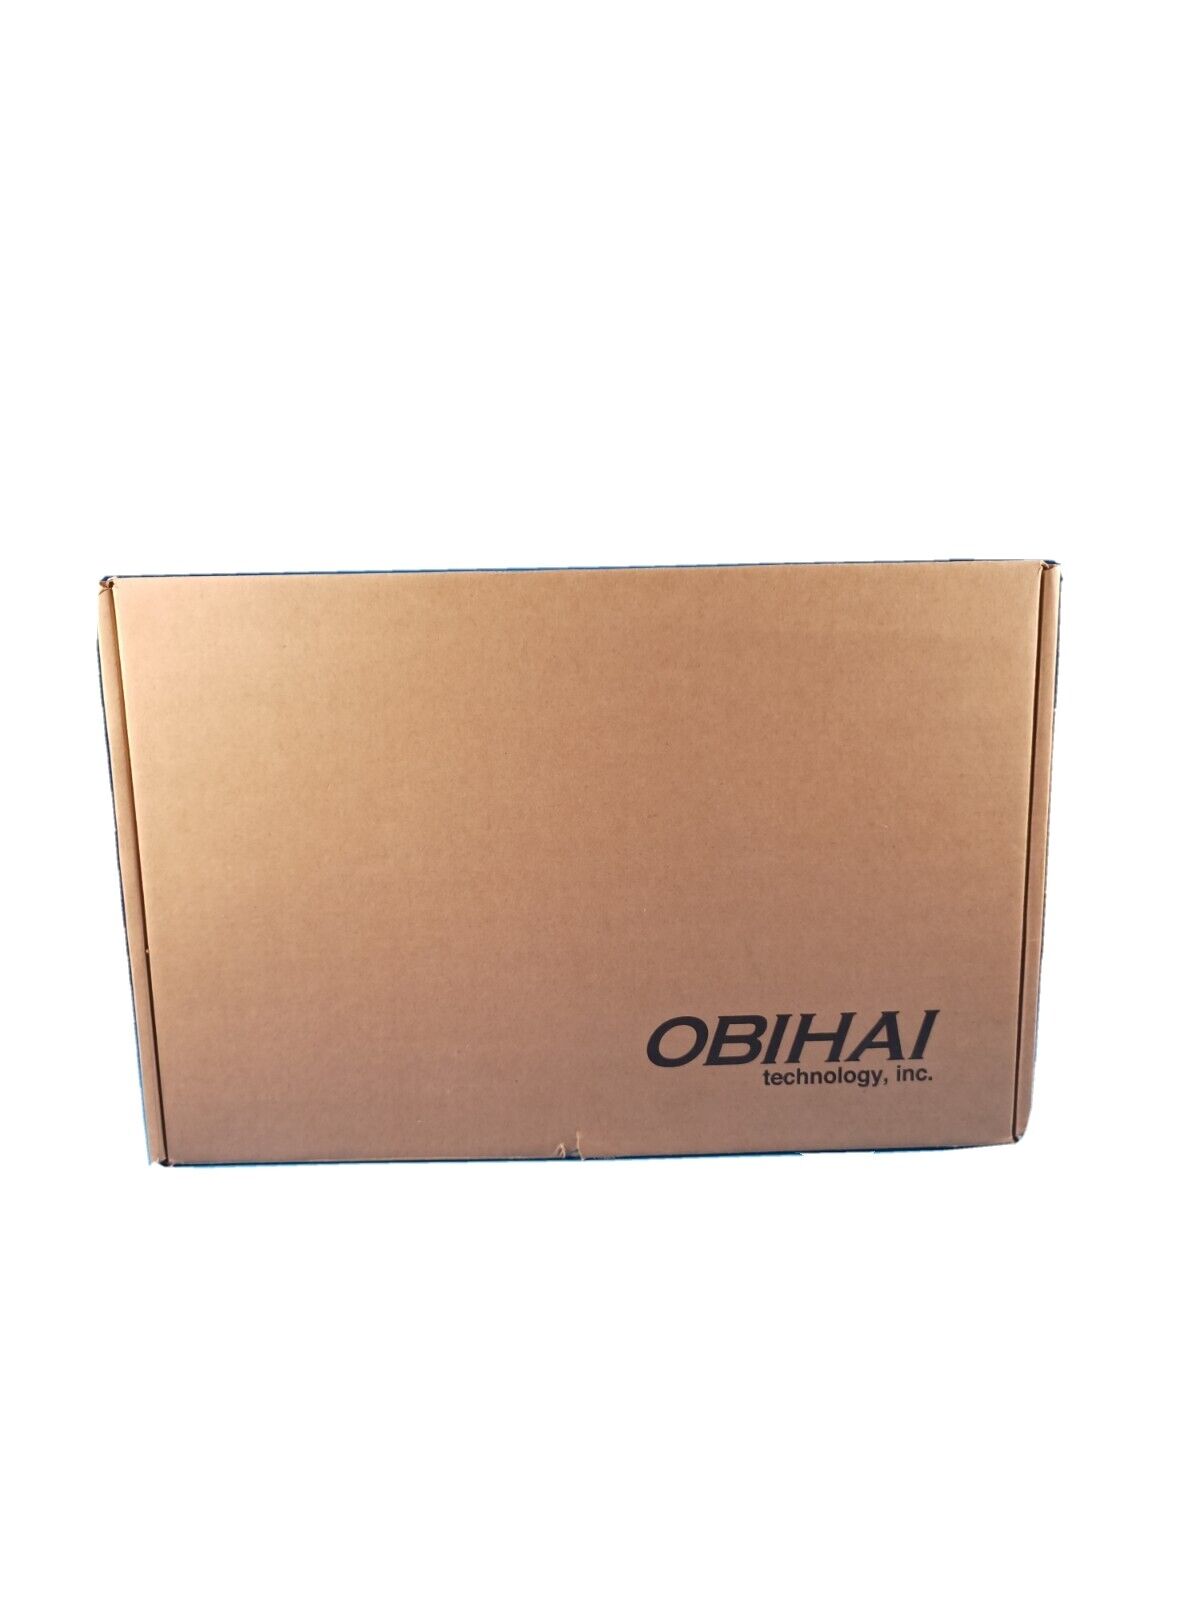 Obihai OBi1022 IP Phone Up to 10 Lines Google Voice and SIP-Based Services